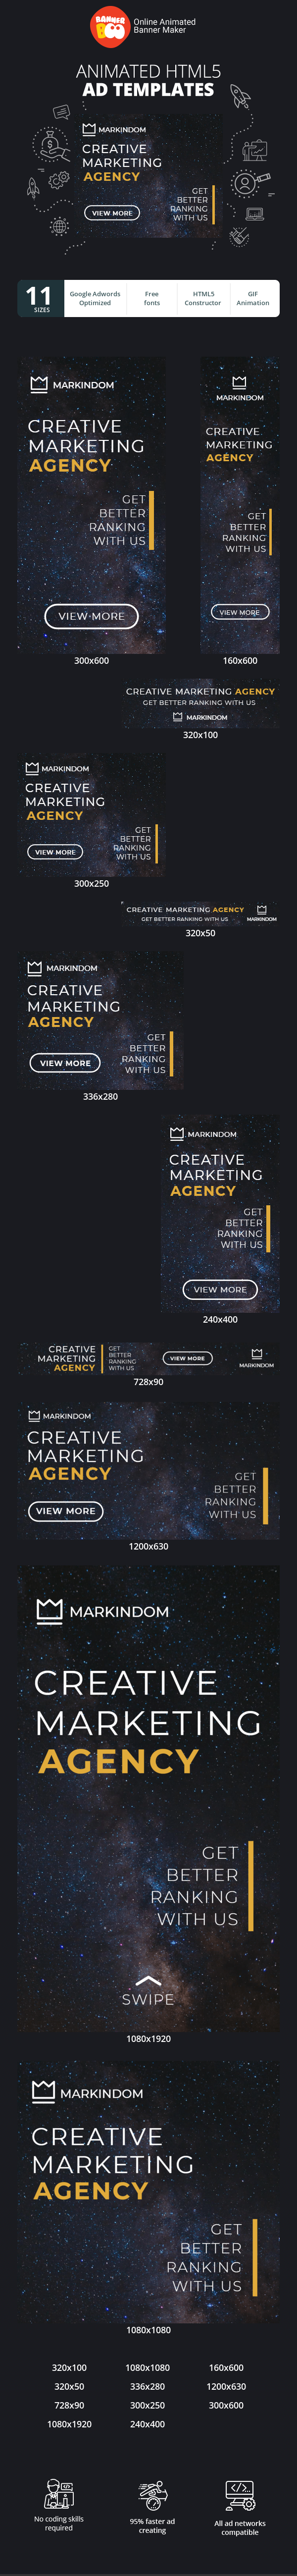 Banner ad template — Creative Marketing Agency  —  Get Better Ranking With Us